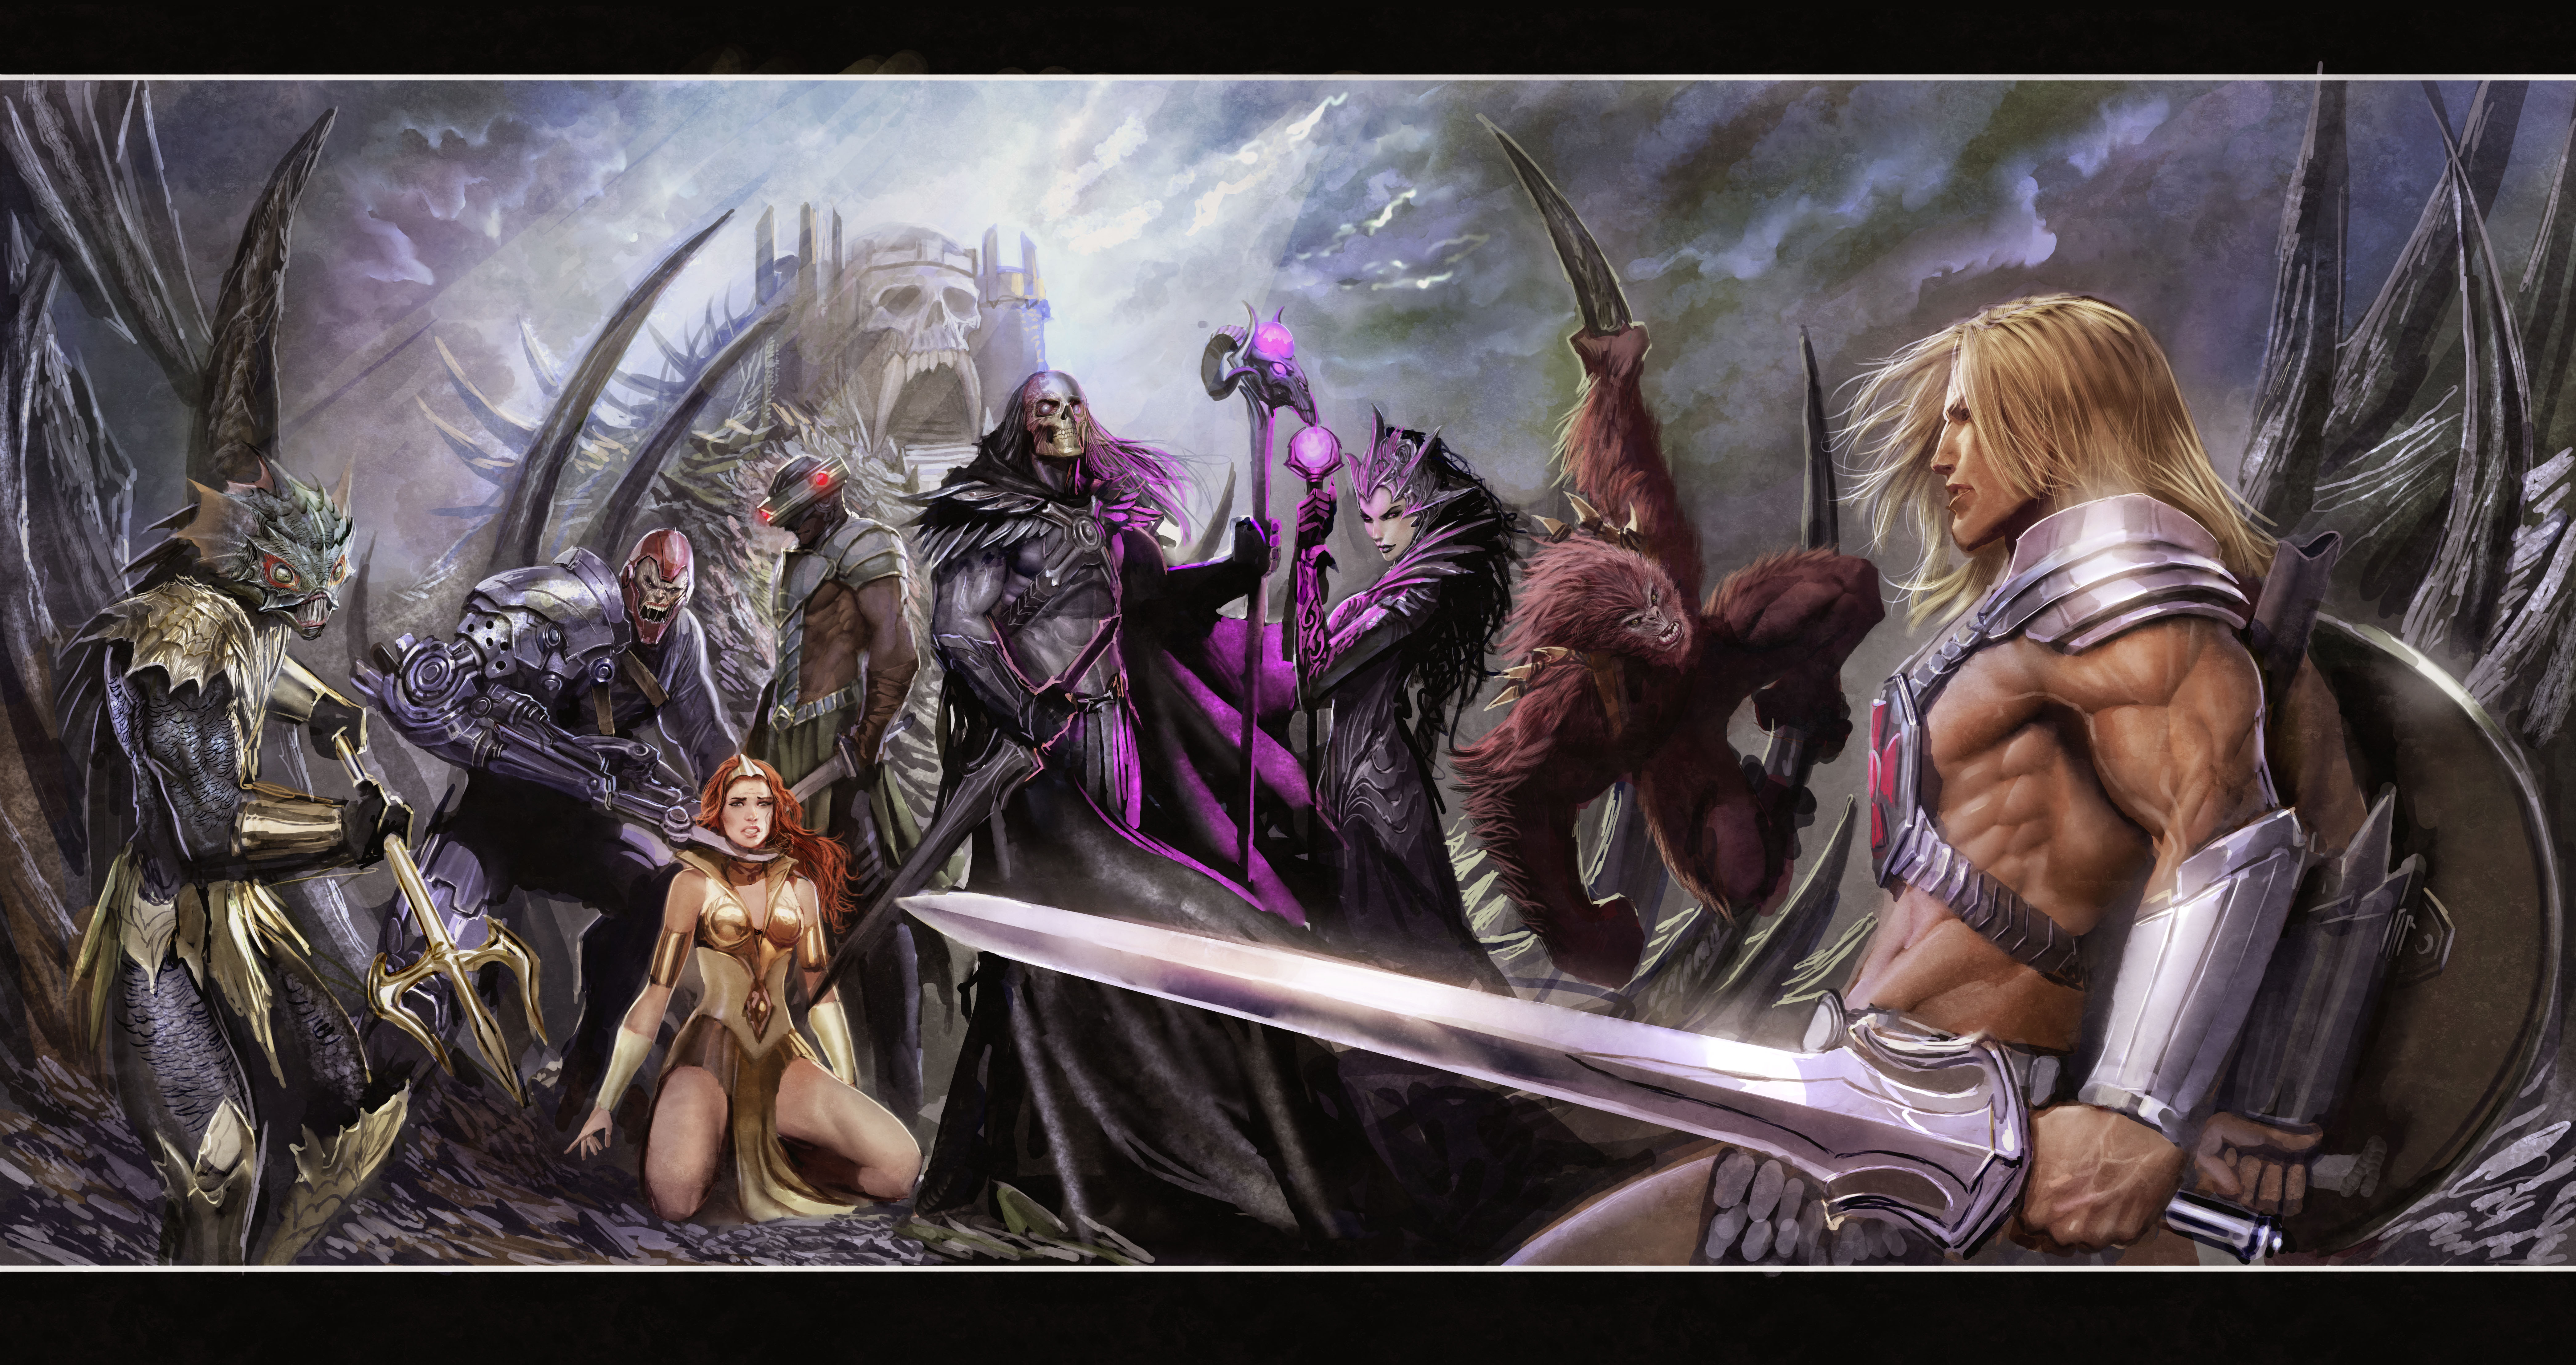 Nebezial He Man Skeletor Evelynn He Man And The Masters Of The Universe 8361x4431